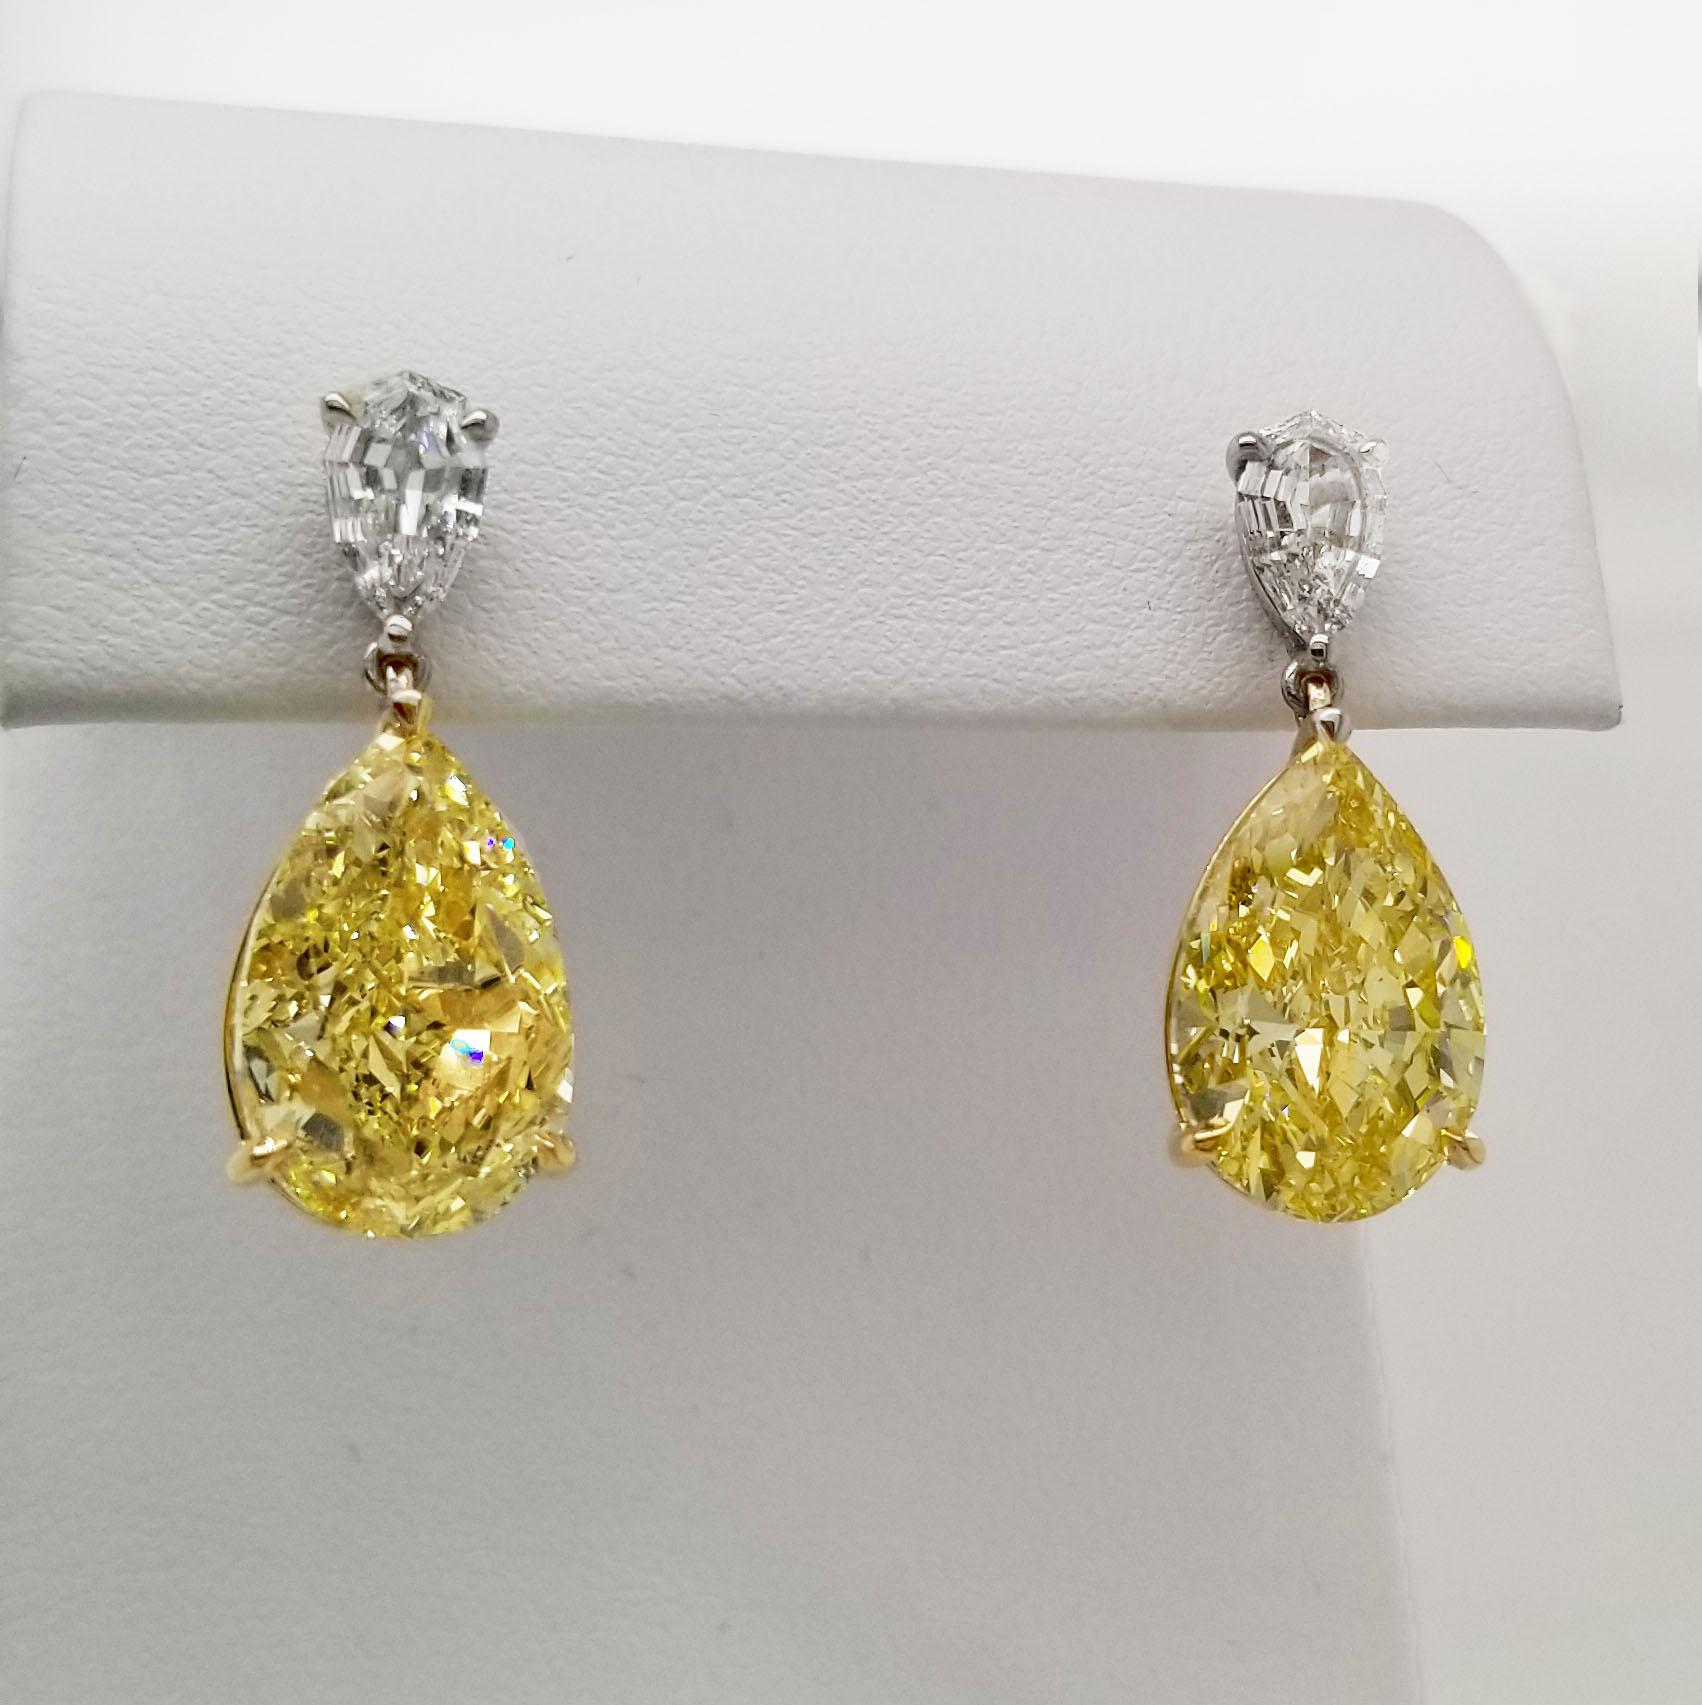 From the exclusive Collection at Scarselli, featuring matching pair 7 carats each fancy intense yellow pear shaped Diamonds VS clarity with GIA certifications (see certificate pictures for detailed stones information). The Yellow Diamonds are